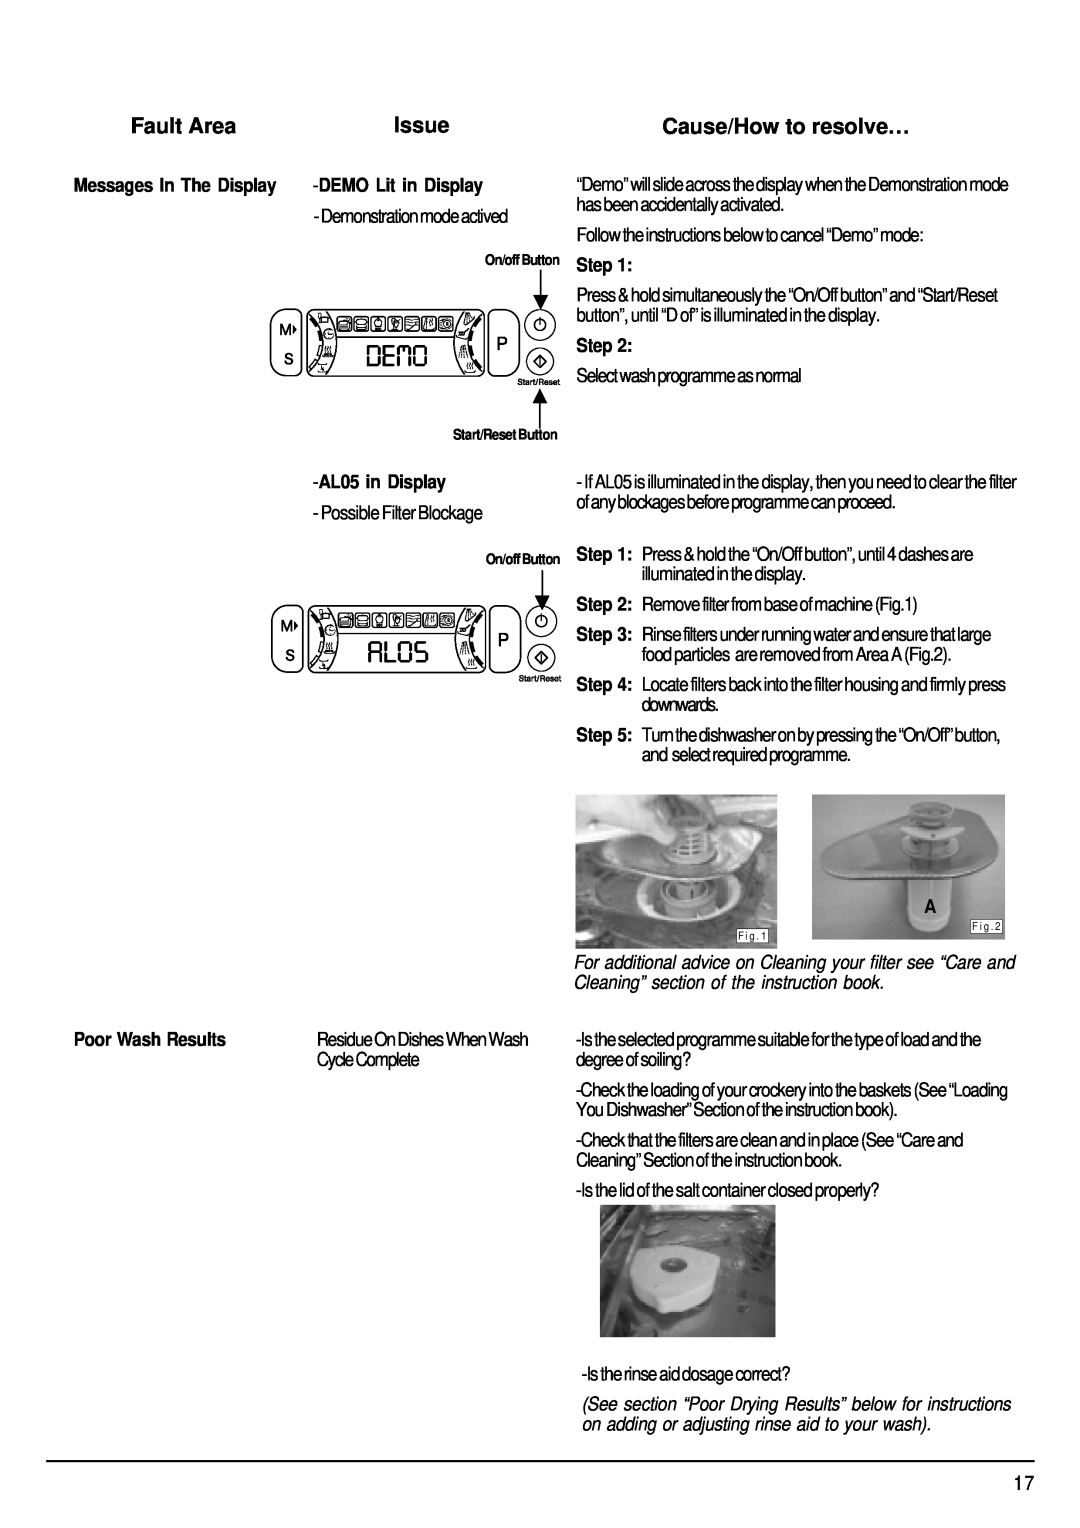 Hotpoint FDW80 Fault Area, Issue, Cause/How to resolve…, Messages In The Display, DEMOLit in Display, Step, AL05in Display 